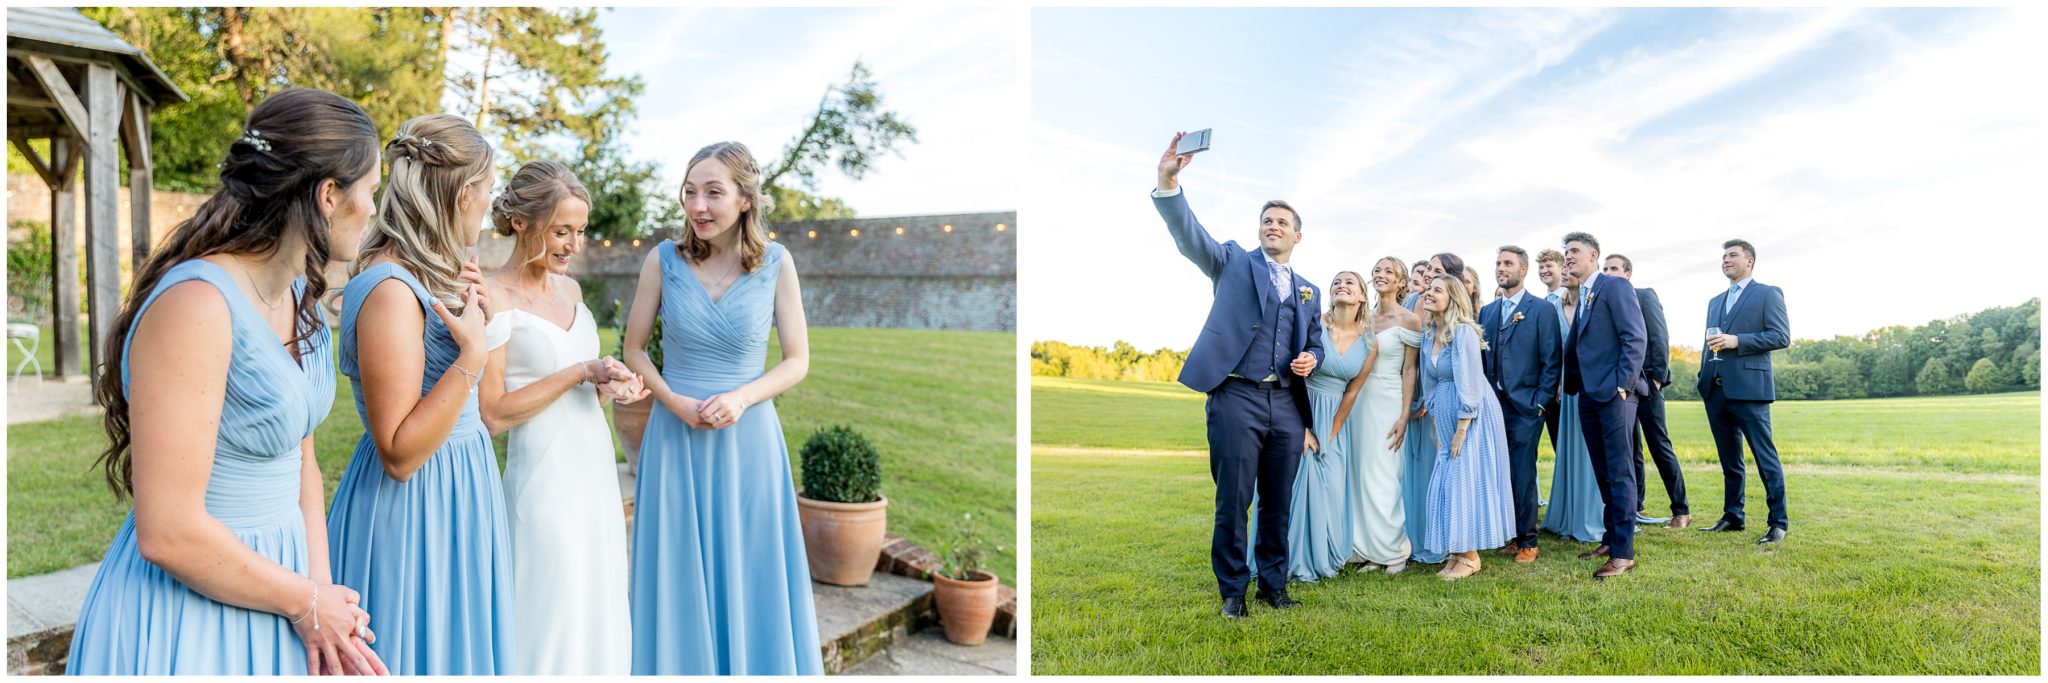 Groom takes a selfie with the wedding party